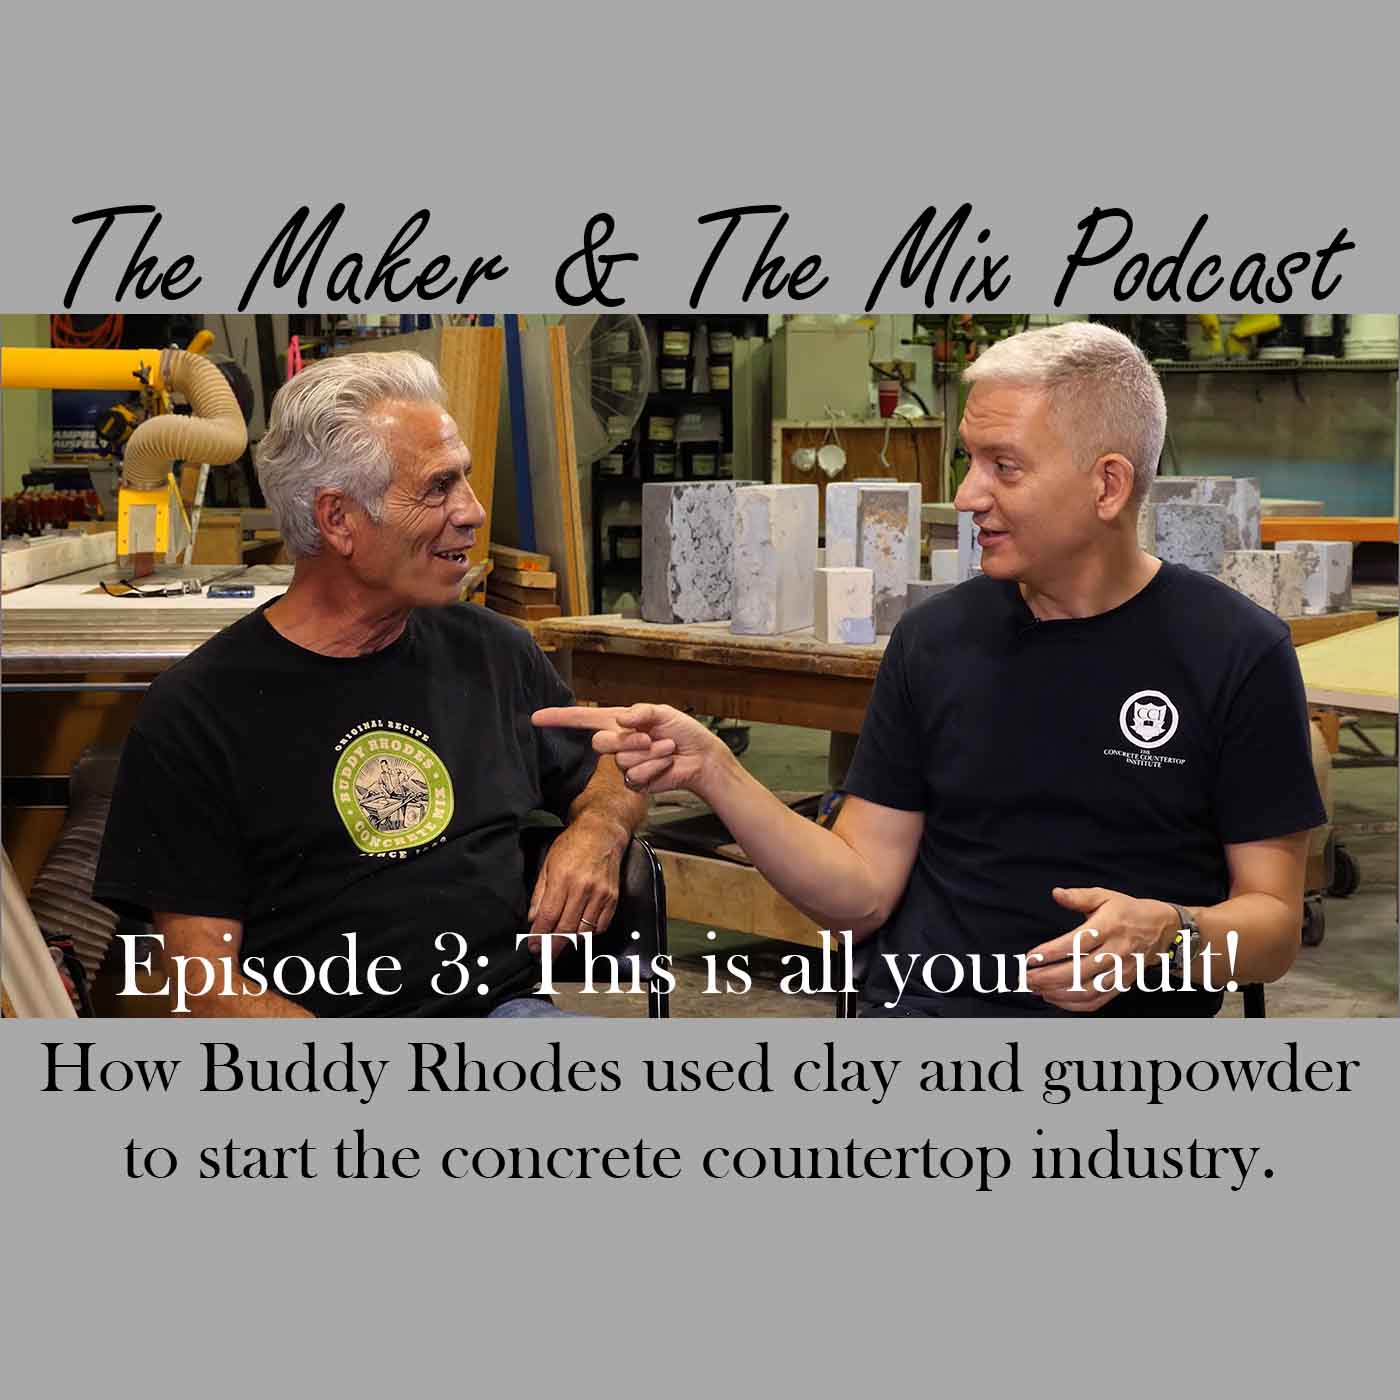 This is all your fault! How Buddy Rhodes used clay and gunpowder to start the concrete countertop industry.